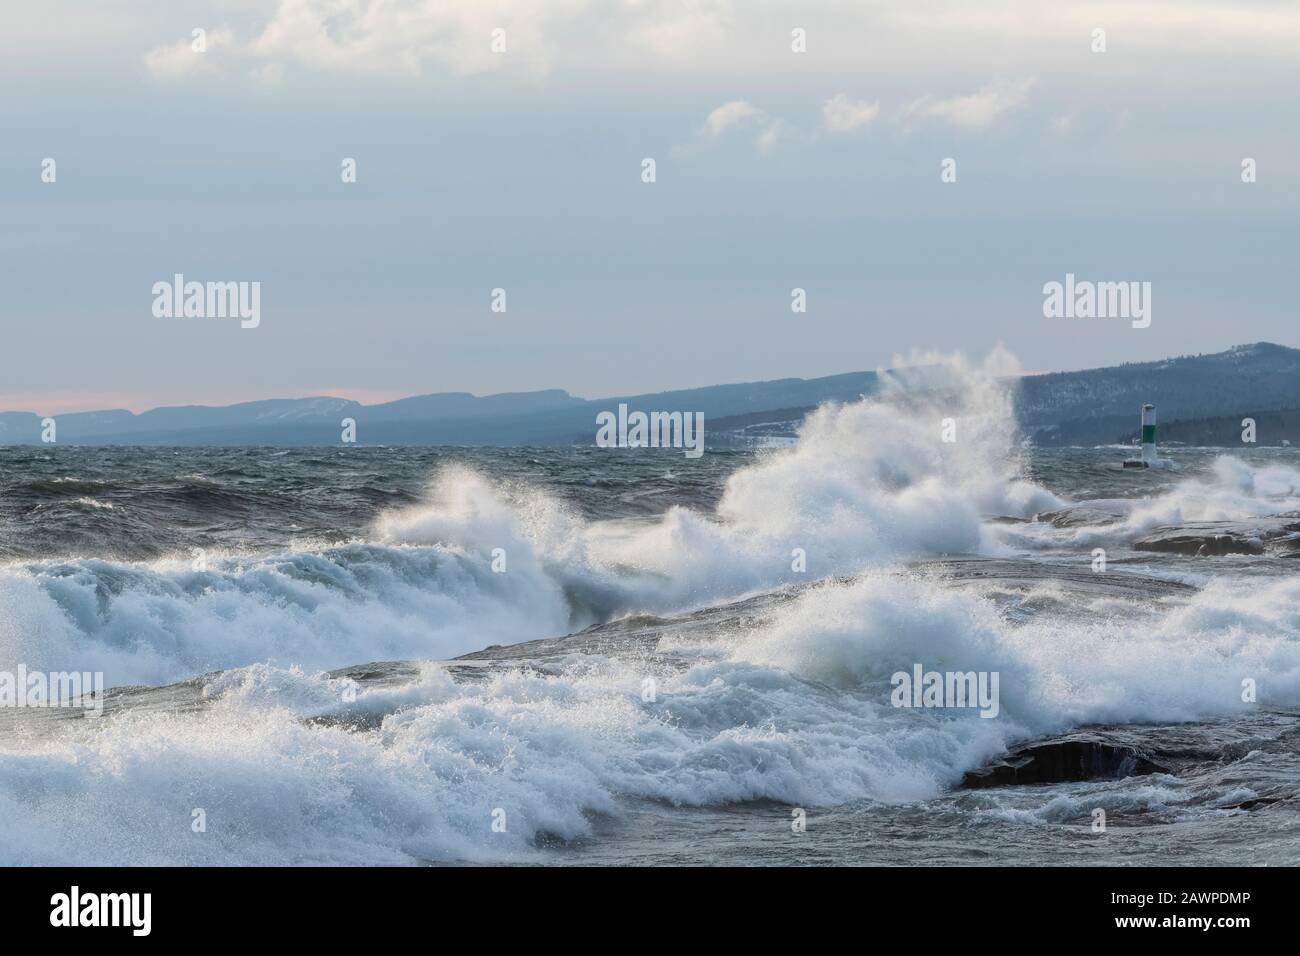 Lake Superior waves batter shoreline, Artist Point, Grand Marais, Cook County, MN, January, by Dominique Braud/Dembinsky Photo Assoc Stock Photo